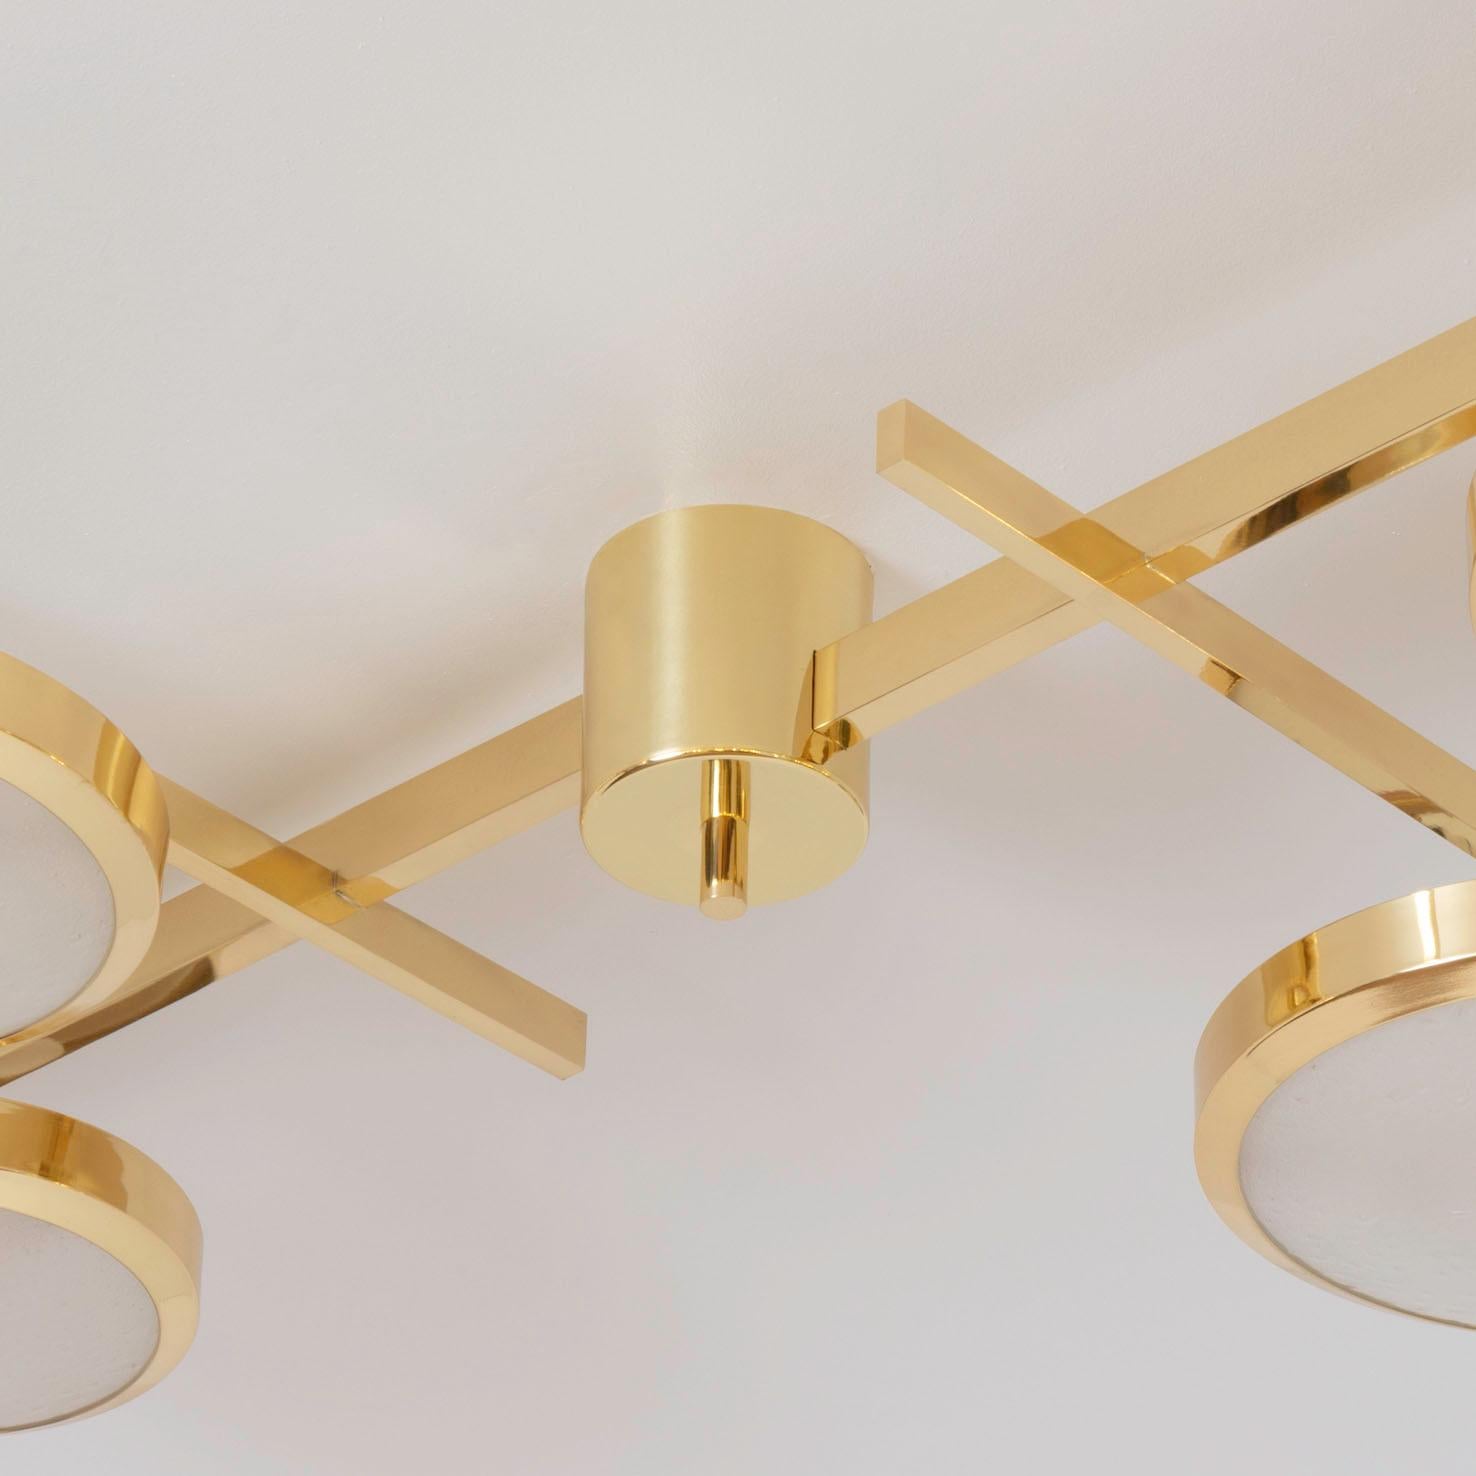 Tetrix Ceiling Light by Gaspare Asaro-Satin Brass Finish For Sale 5